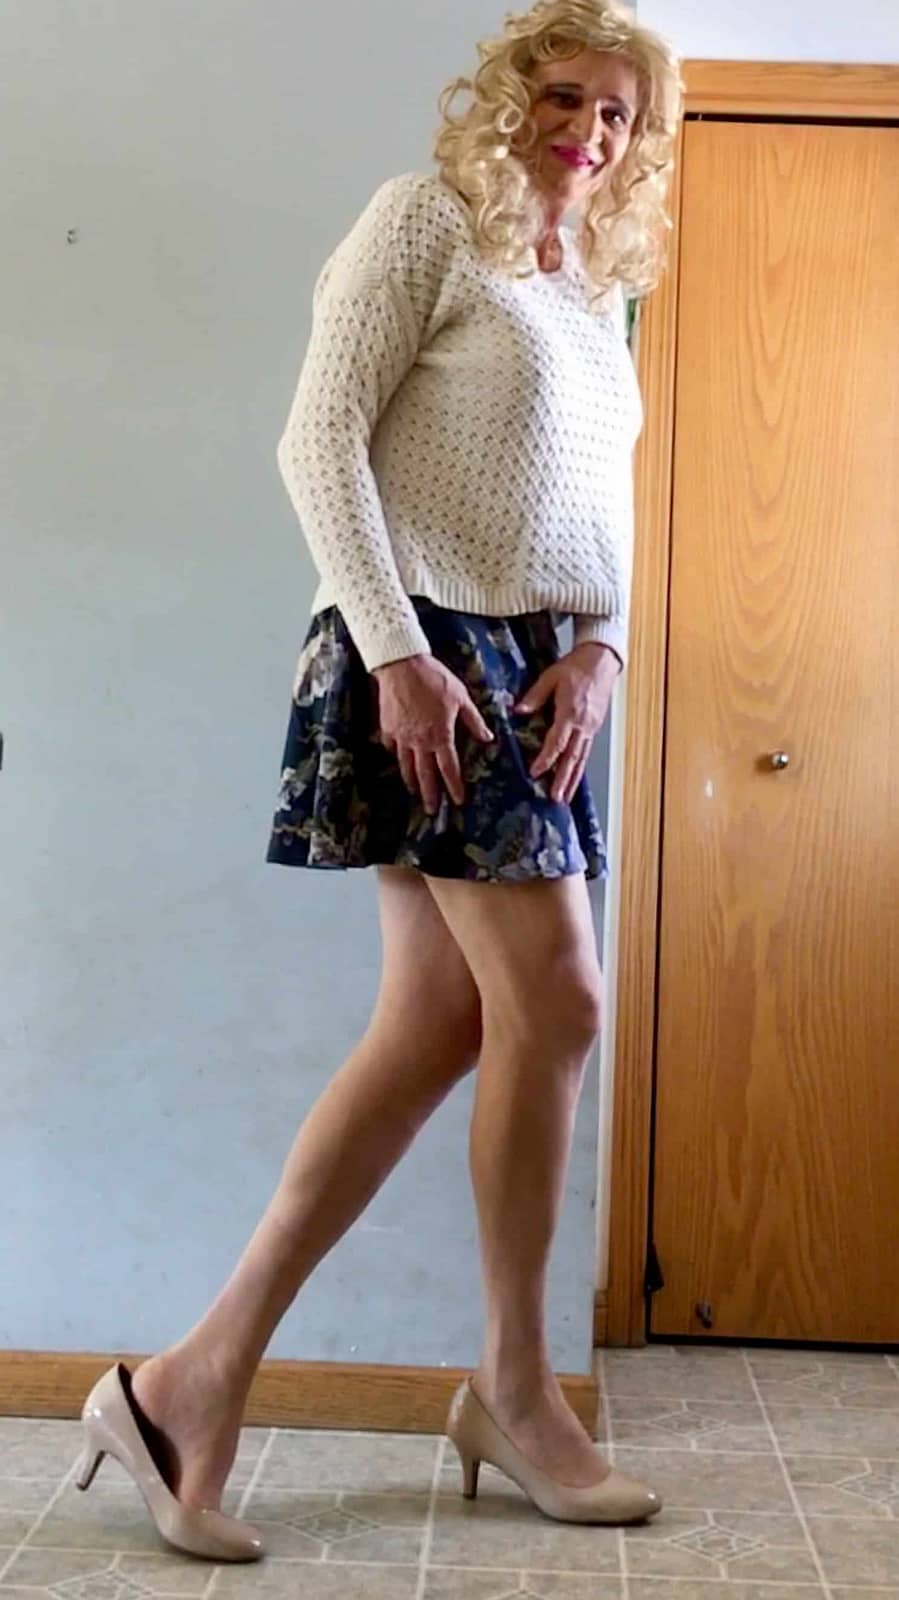 Skirt with heels and pantyhose